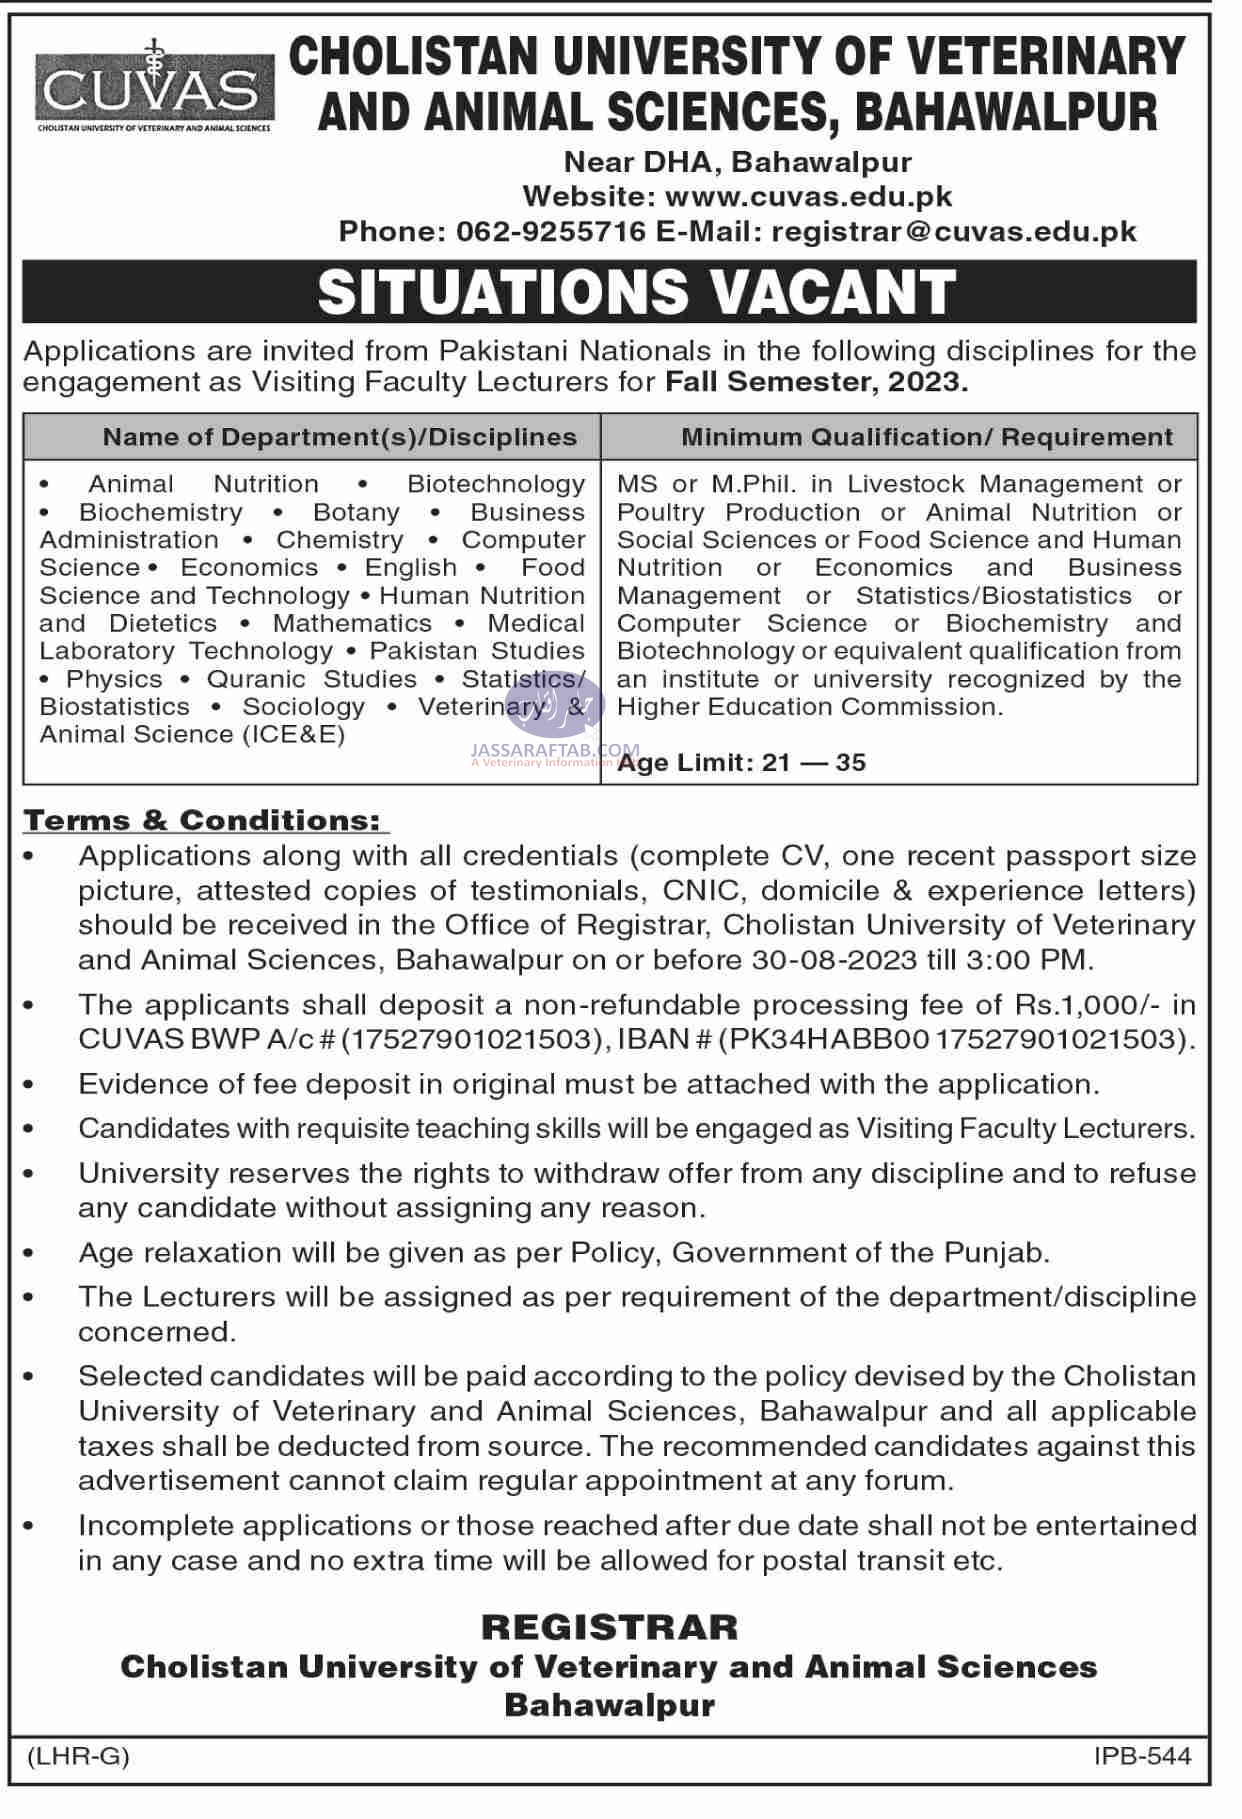 Visiting faculty lecturers jobs in CUVAS